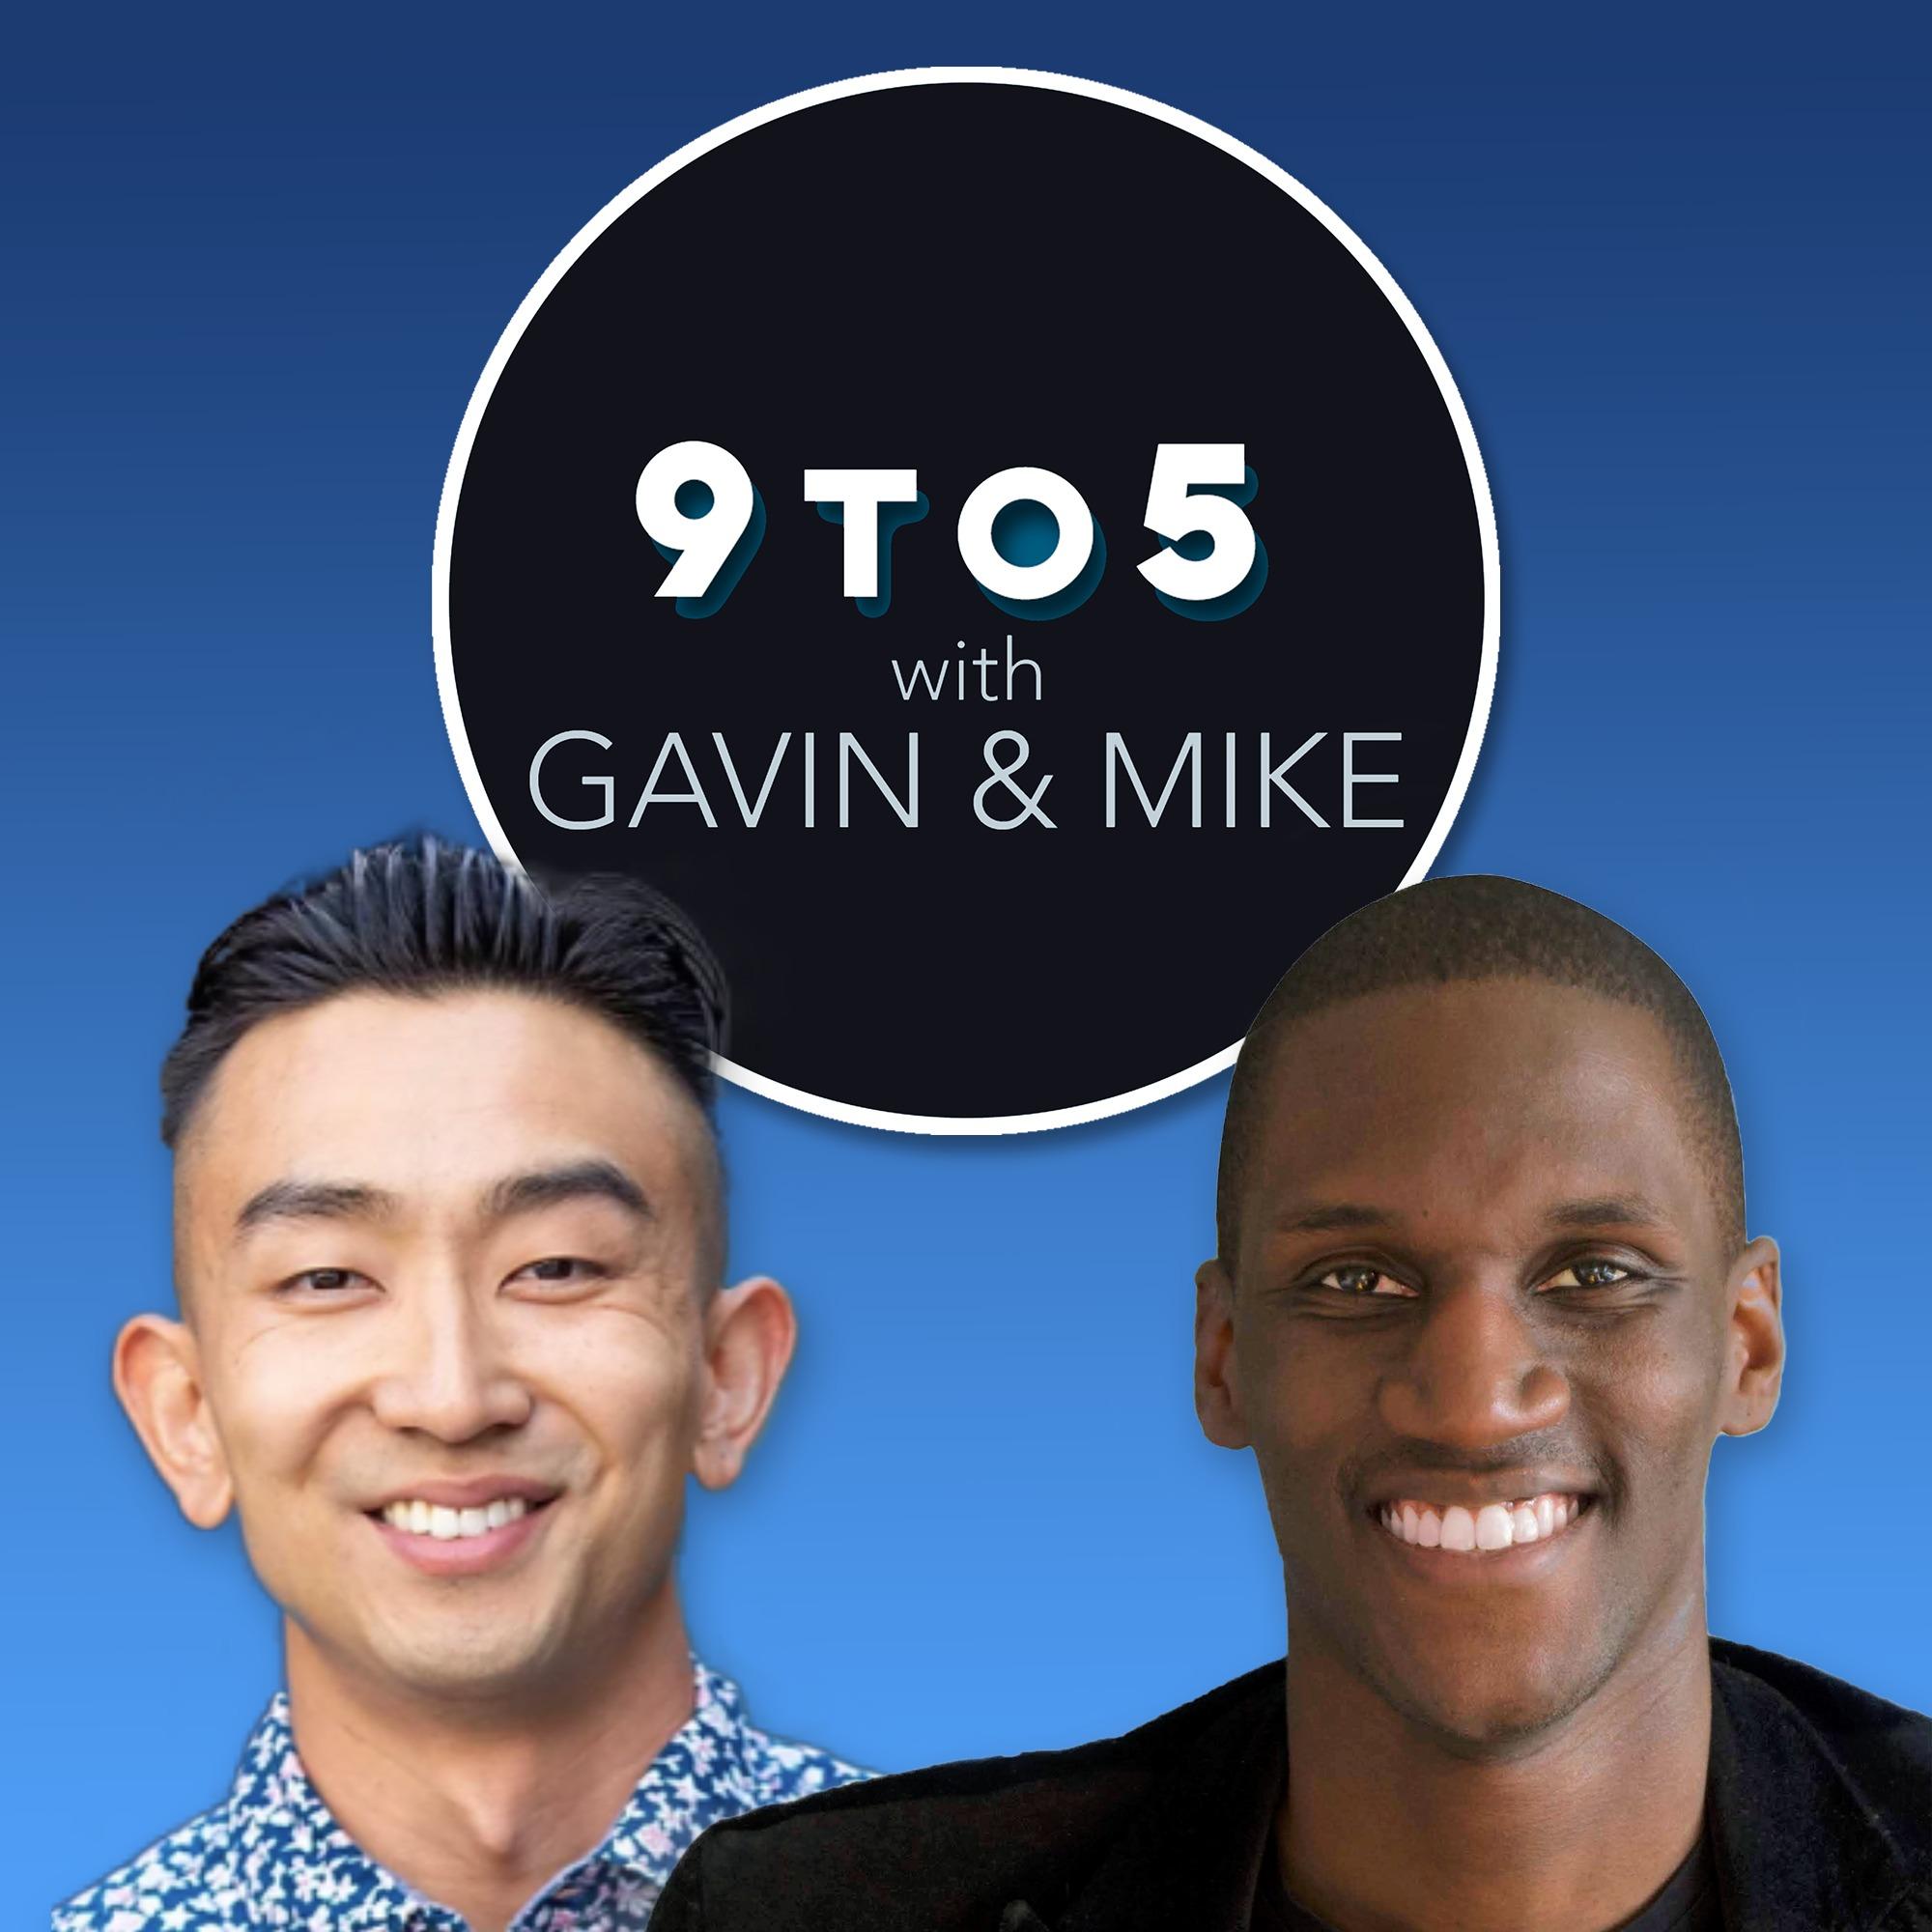 9 to 5 with Gavin & Mike